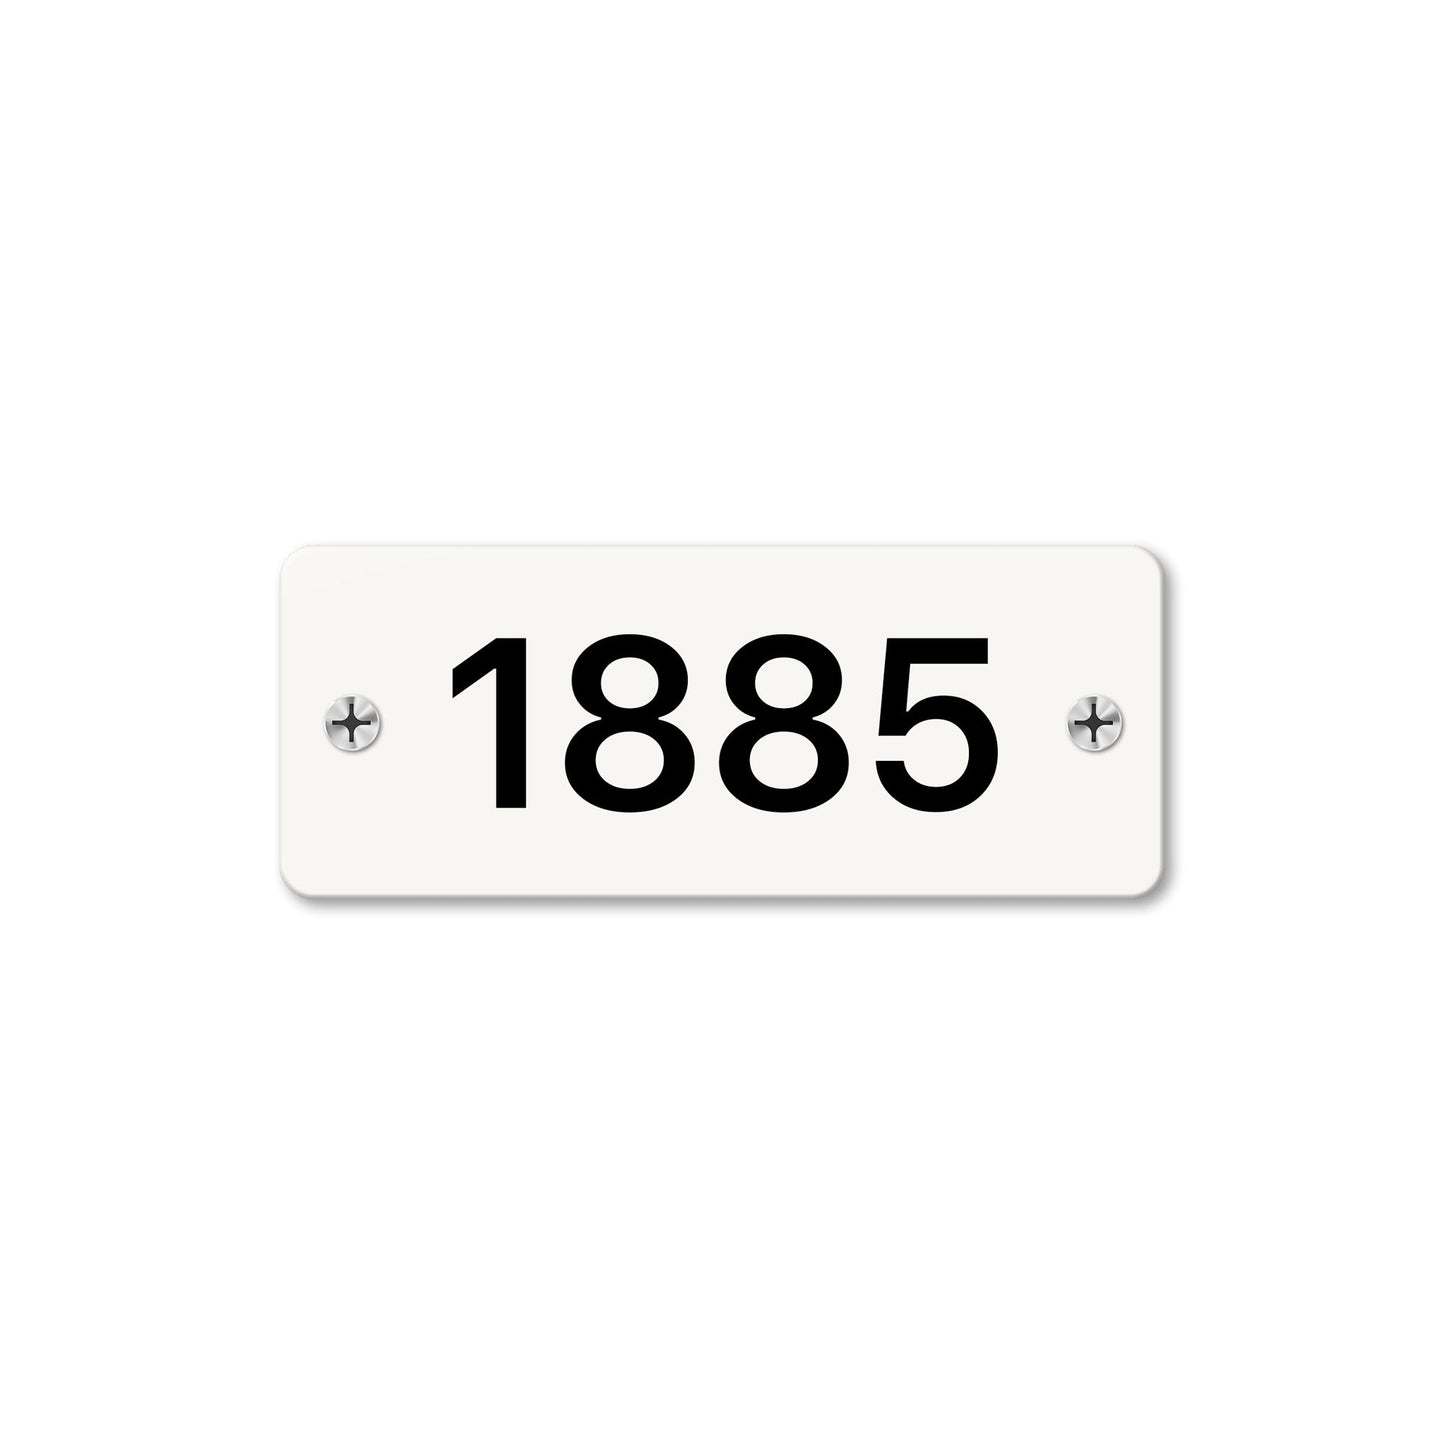 Numeral 1885